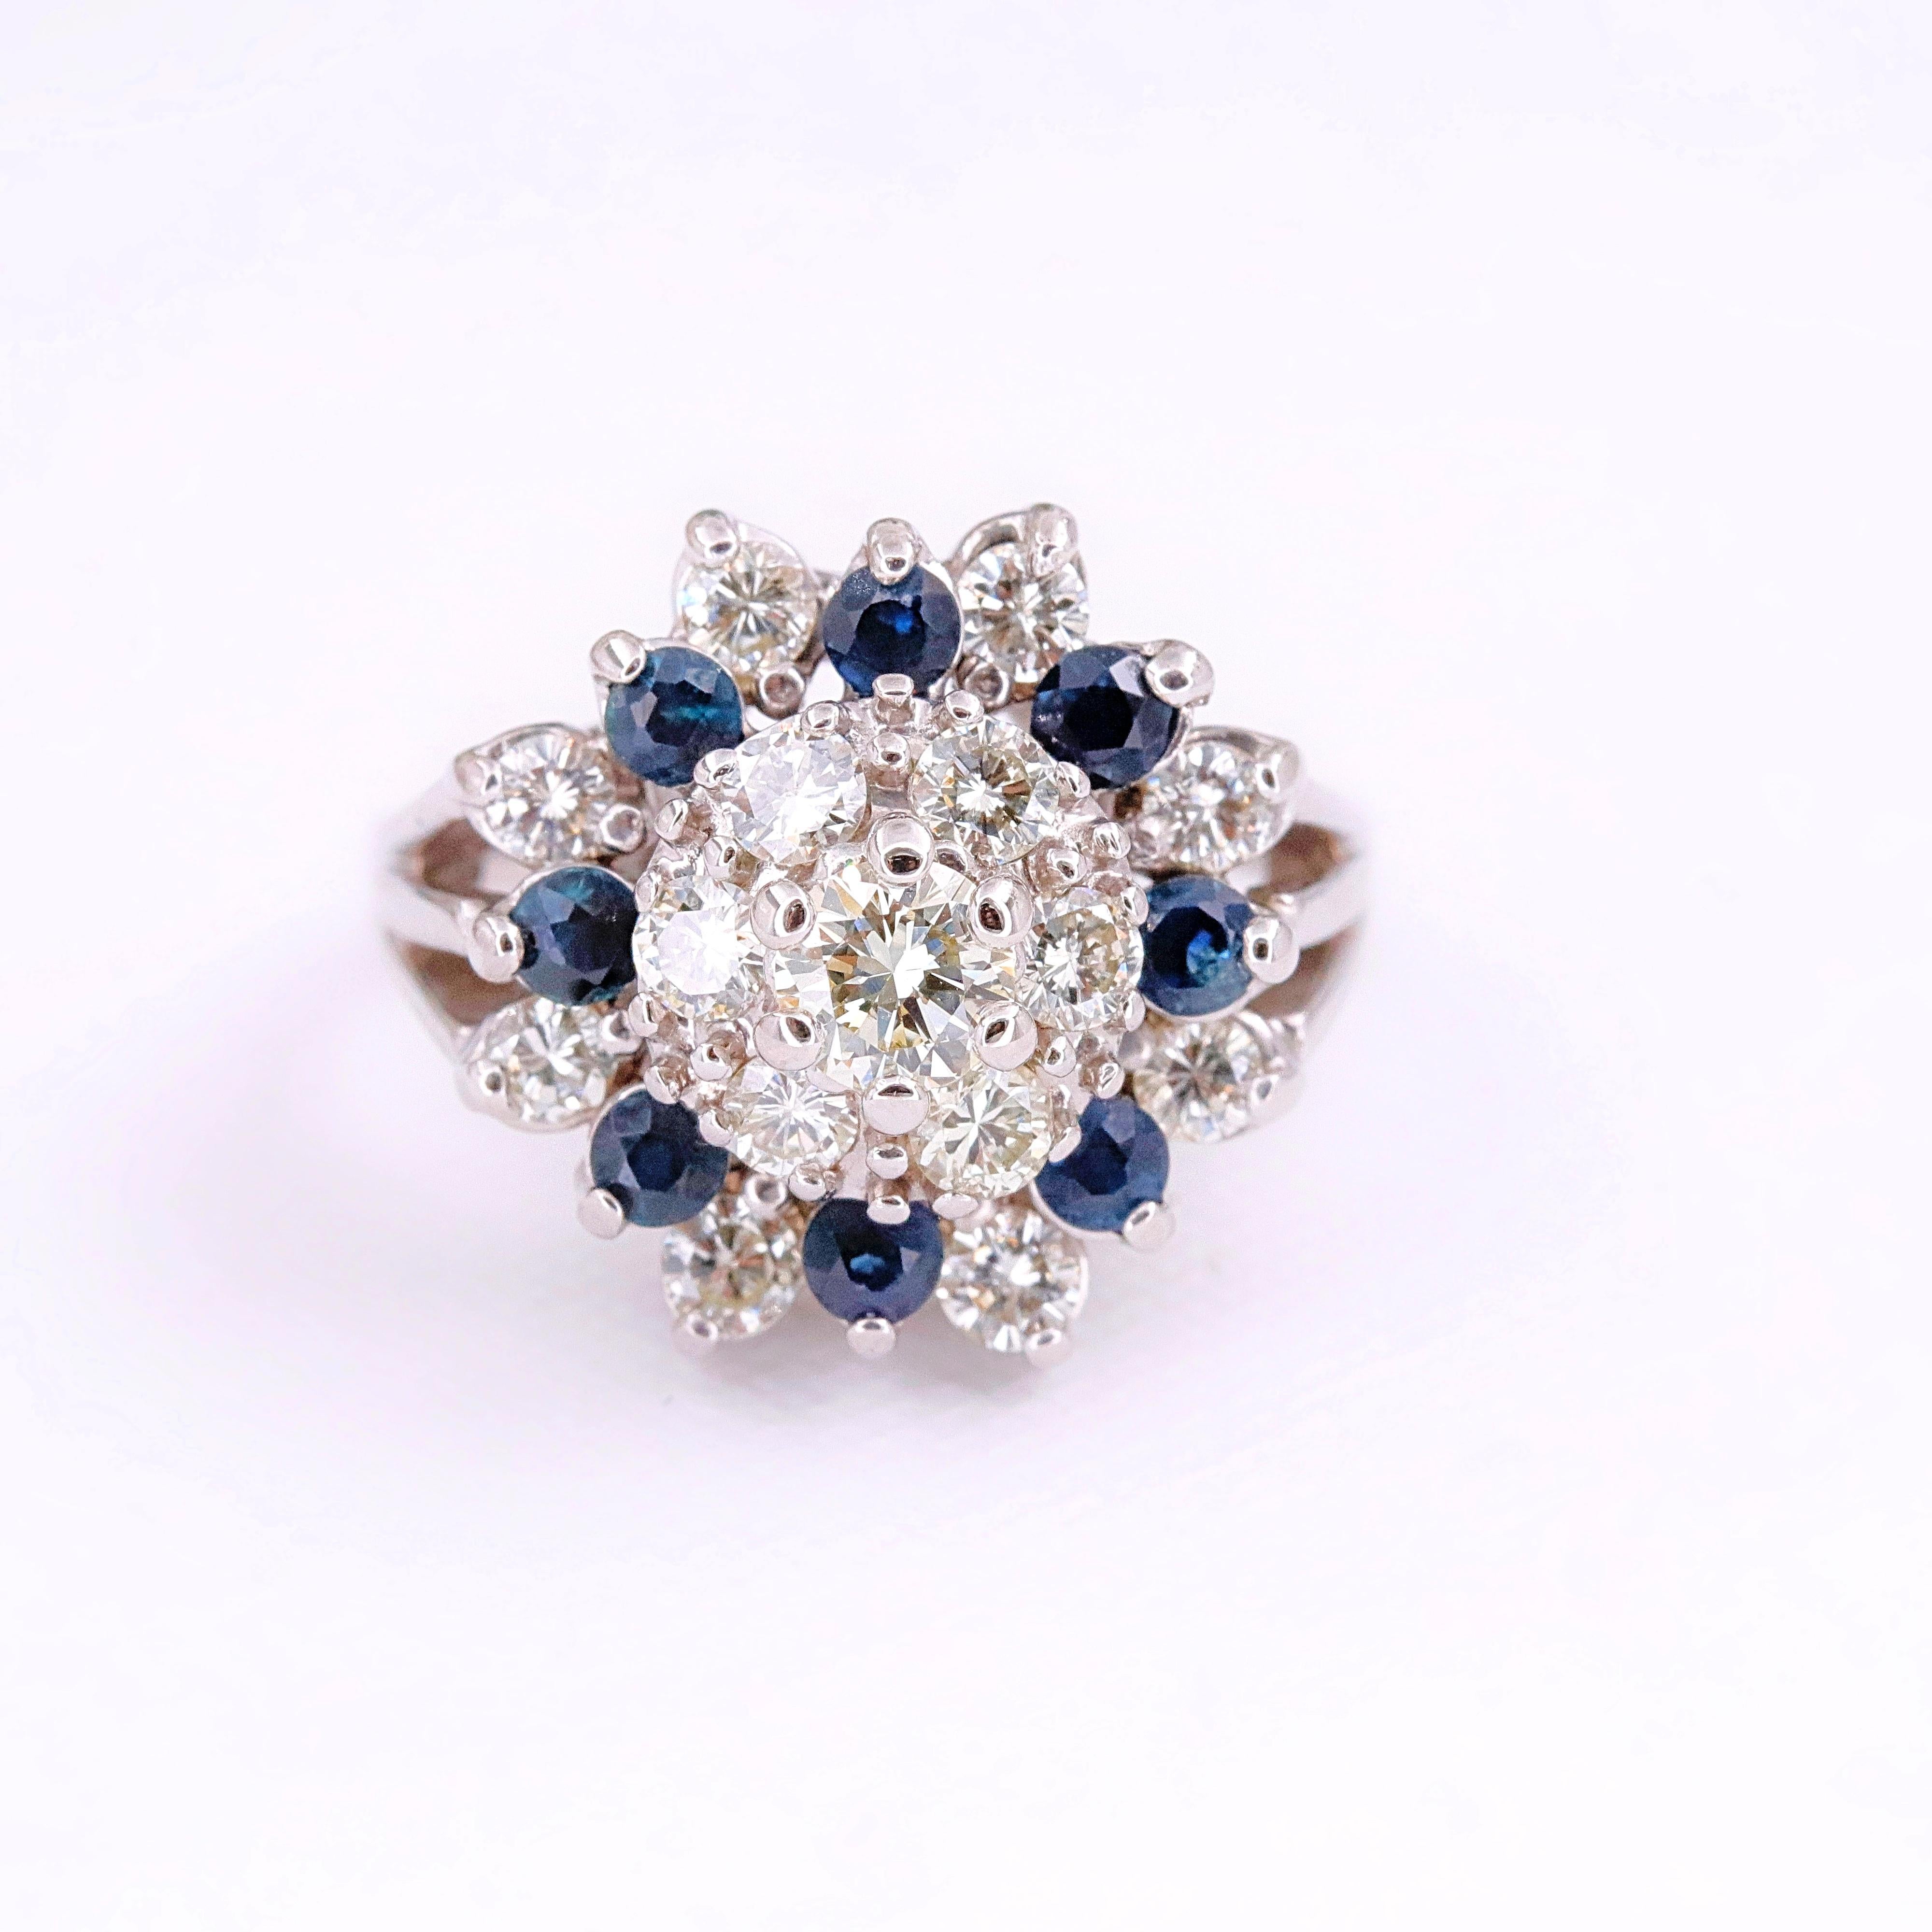 Diamond & Sapphire Princess Style Flower Cocktail Ring

Metal: 14k White Gold
Size: 6.5 - sizable
Total Carat Weight: 2.75 tcw
Center Diamond Shape: Round Brilliant Diamond 0.40 cts H - I color, VS2 clarity
Accent Stones: 14 Round Brilliant Diamonds